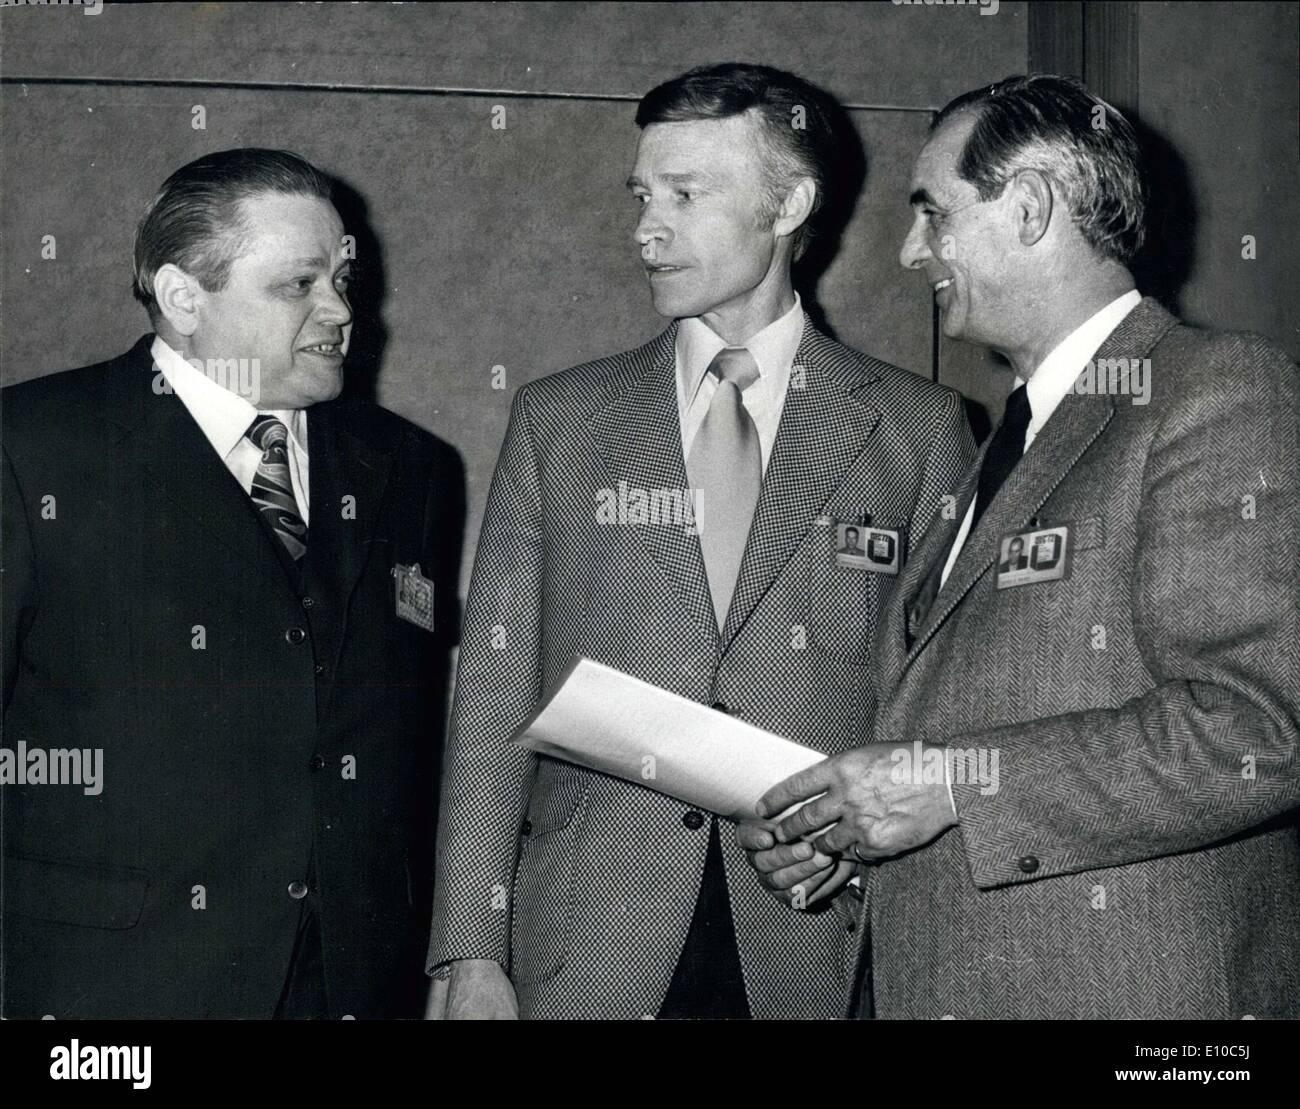 Apr. 04, 1972 - International Security Exhibition and Conference.: Security experts from both sides of the Atlantic are attending the International Security Exhibition and Conference, which opened today at the Royal Lancaster Hotel, London. Photo shows Pictured at the conference today are (L to R): Ernst Keller, Principal Superintendent and head of the crime prevention department at the Landeskriminalamt Rheinland - Platz, Knoblenz West Germany; C.R. Gain, Chief of Police, Oakland Police Dept Stock Photo